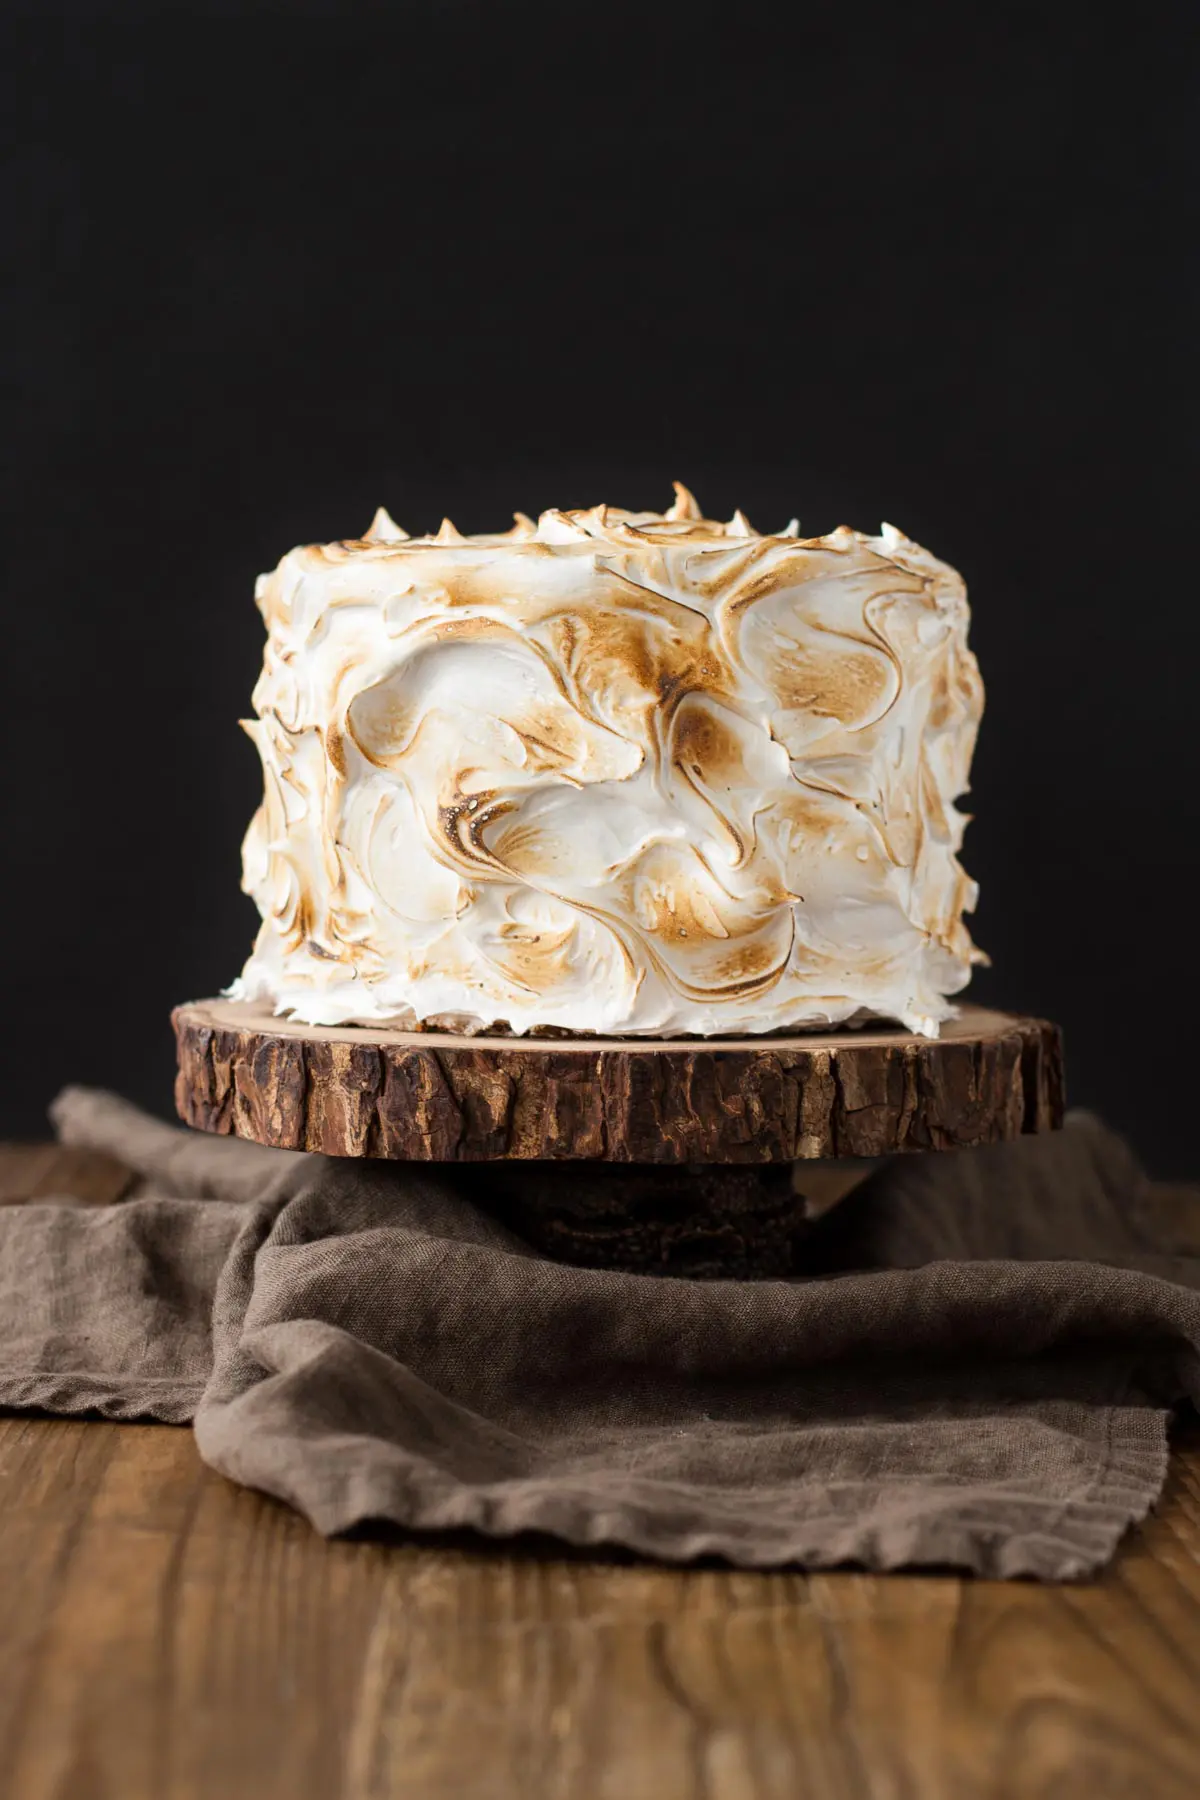 Picture of a S'mores Cake covered in meringue that is torched.